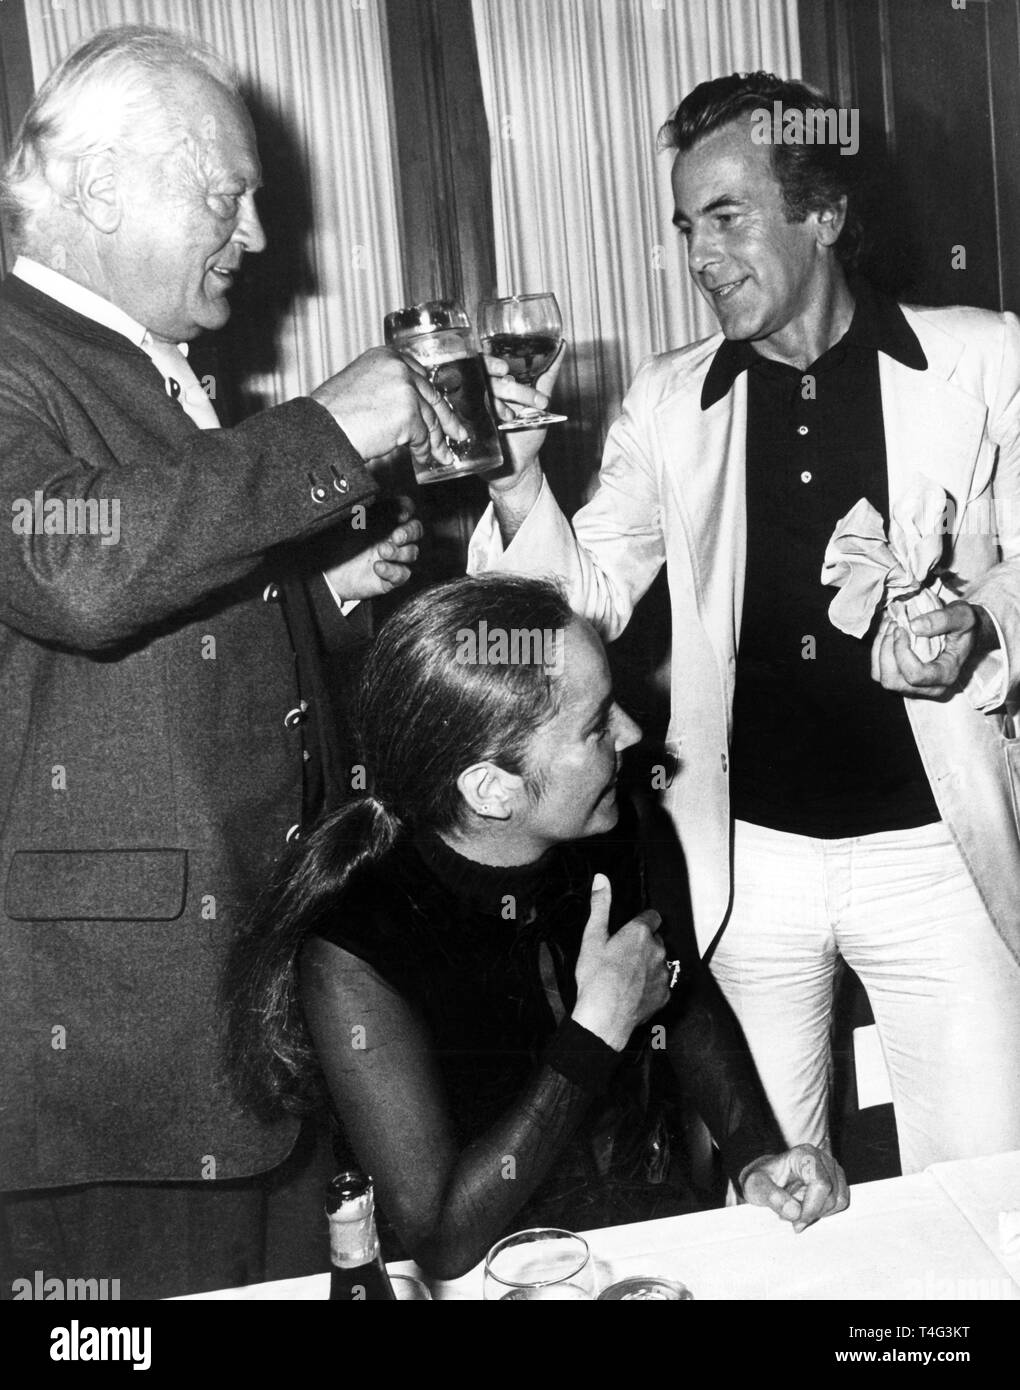 Curd Jürgens (l) and Maximilian Schell (r) raise their glasses to each other, in the centre Margie Jürgens, at the final party after the 'Jedermann' performance during the Salzburg Festival at castle Klessheim on 28 August 1977. | usage worldwide Stock Photo